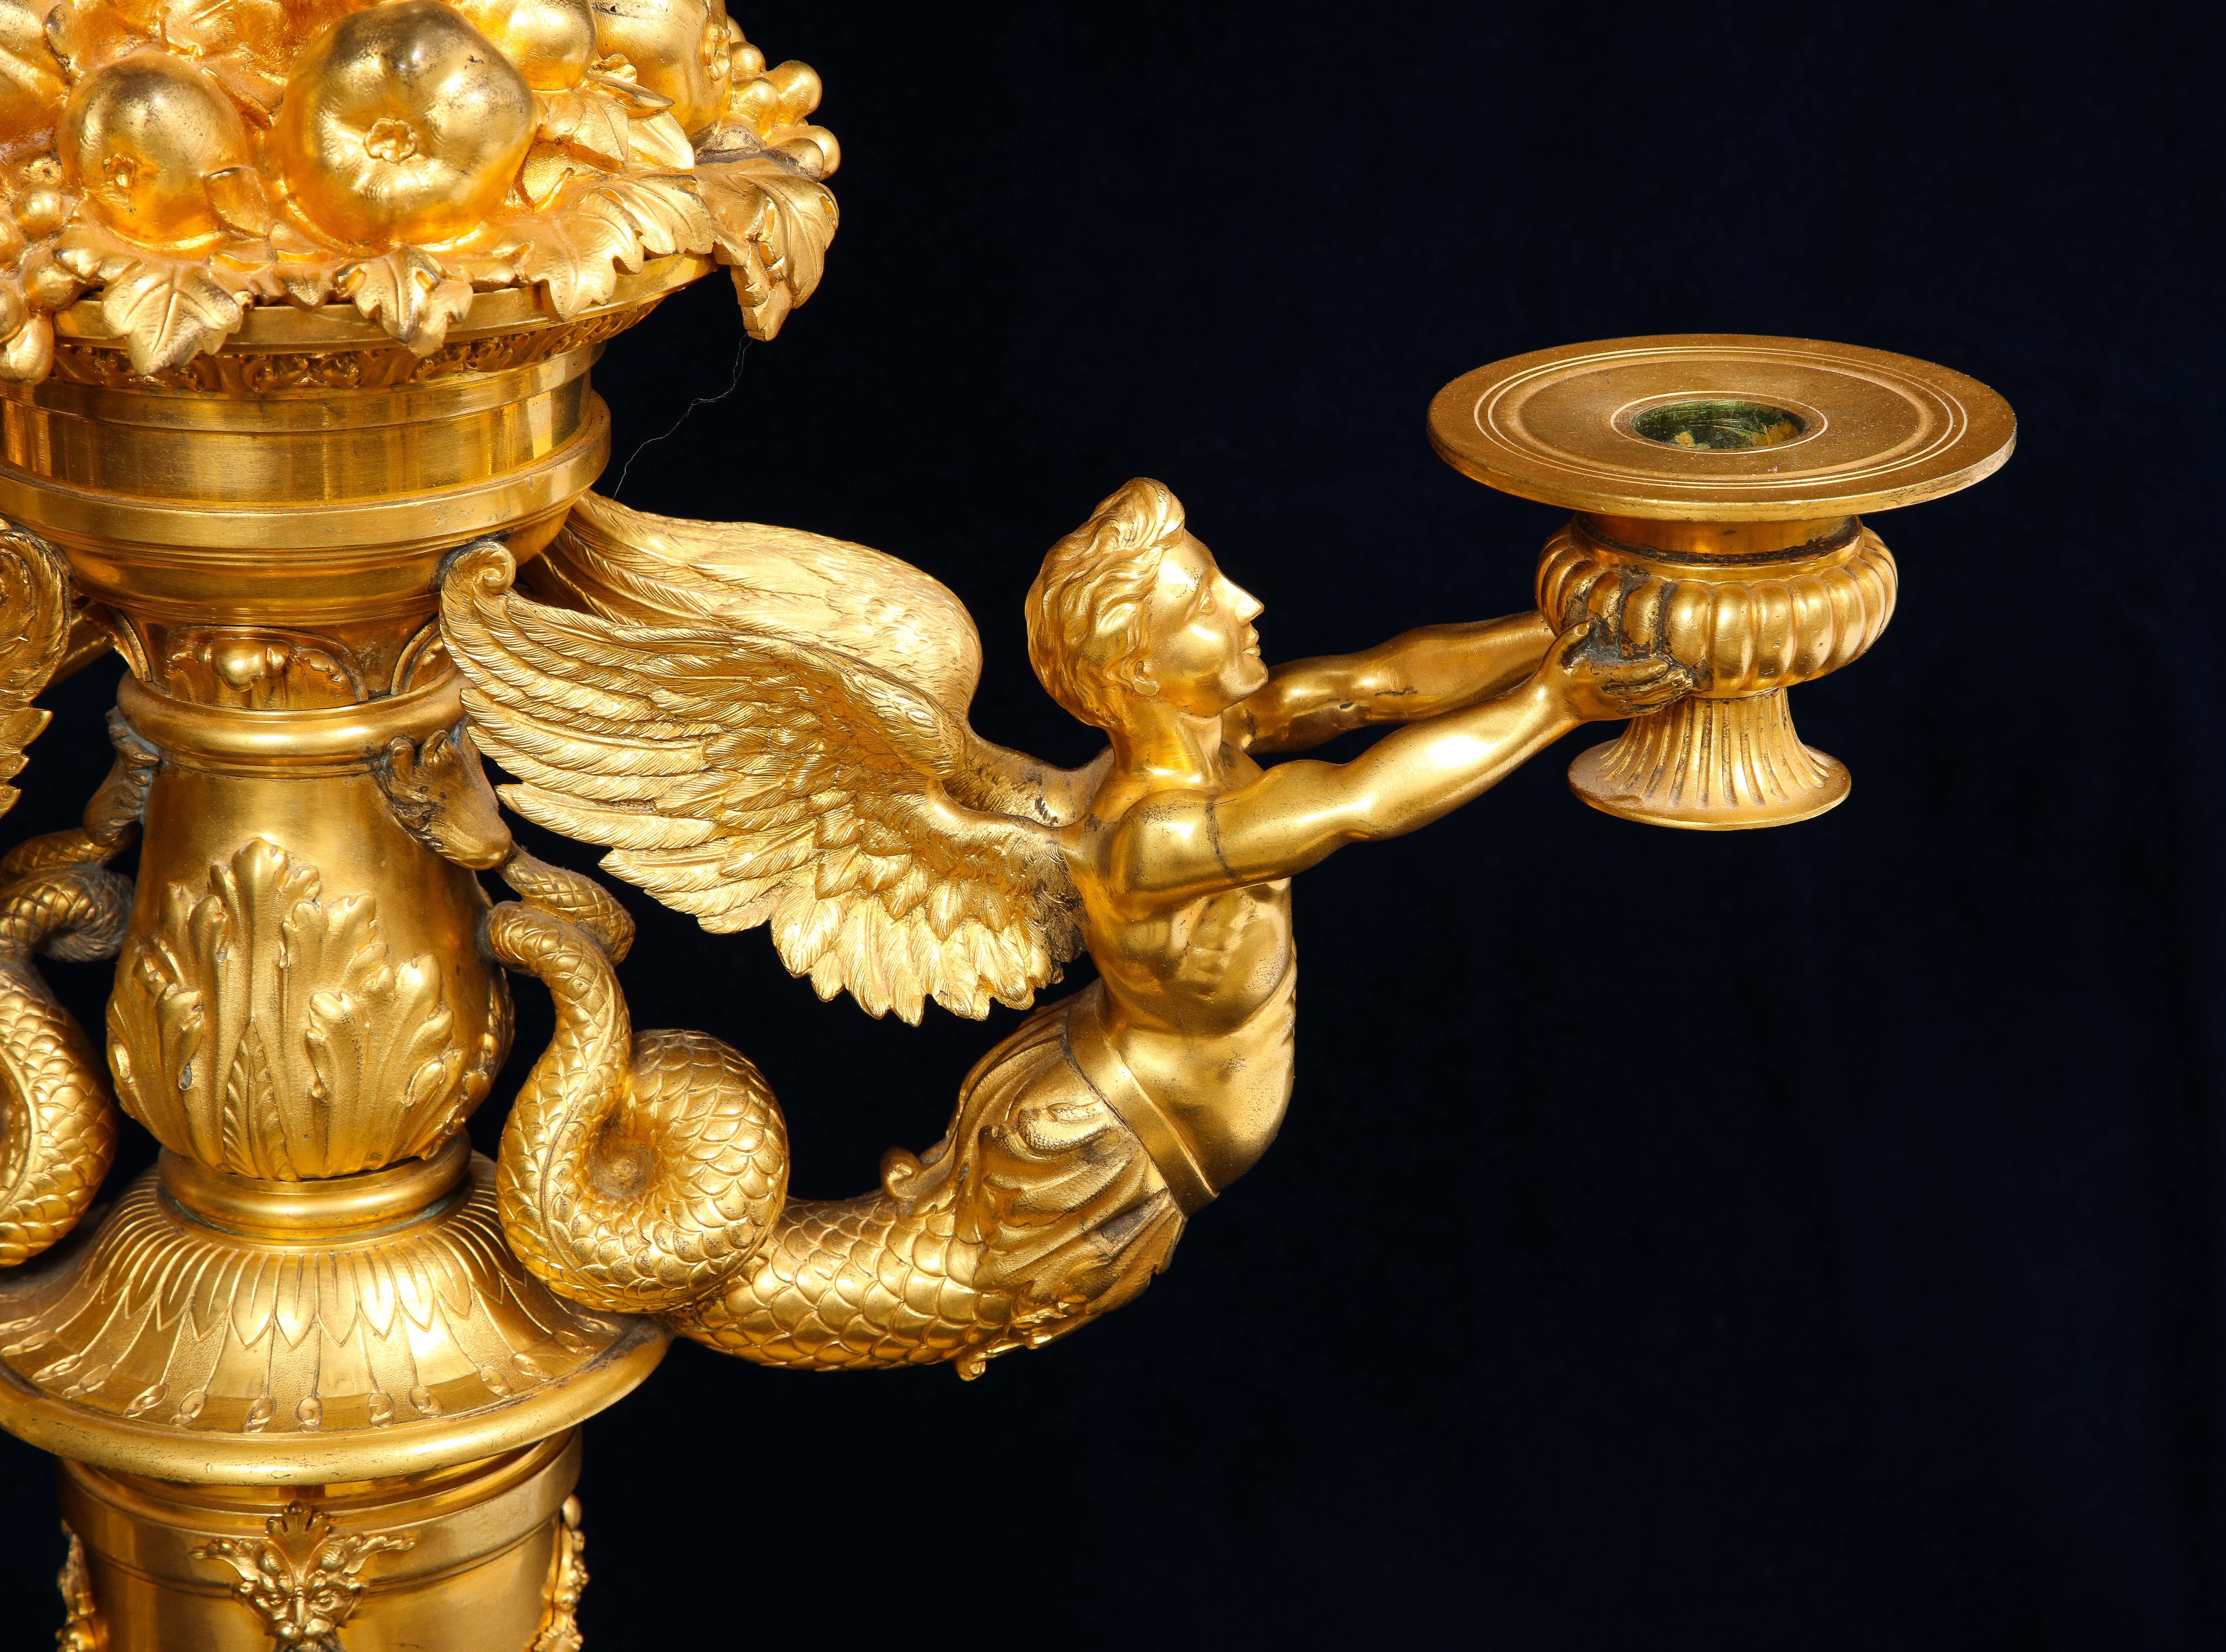 Marvelous Pair of 19th C. French Ormolu Four Arm Candelabras, Signed P. Canaux For Sale 7